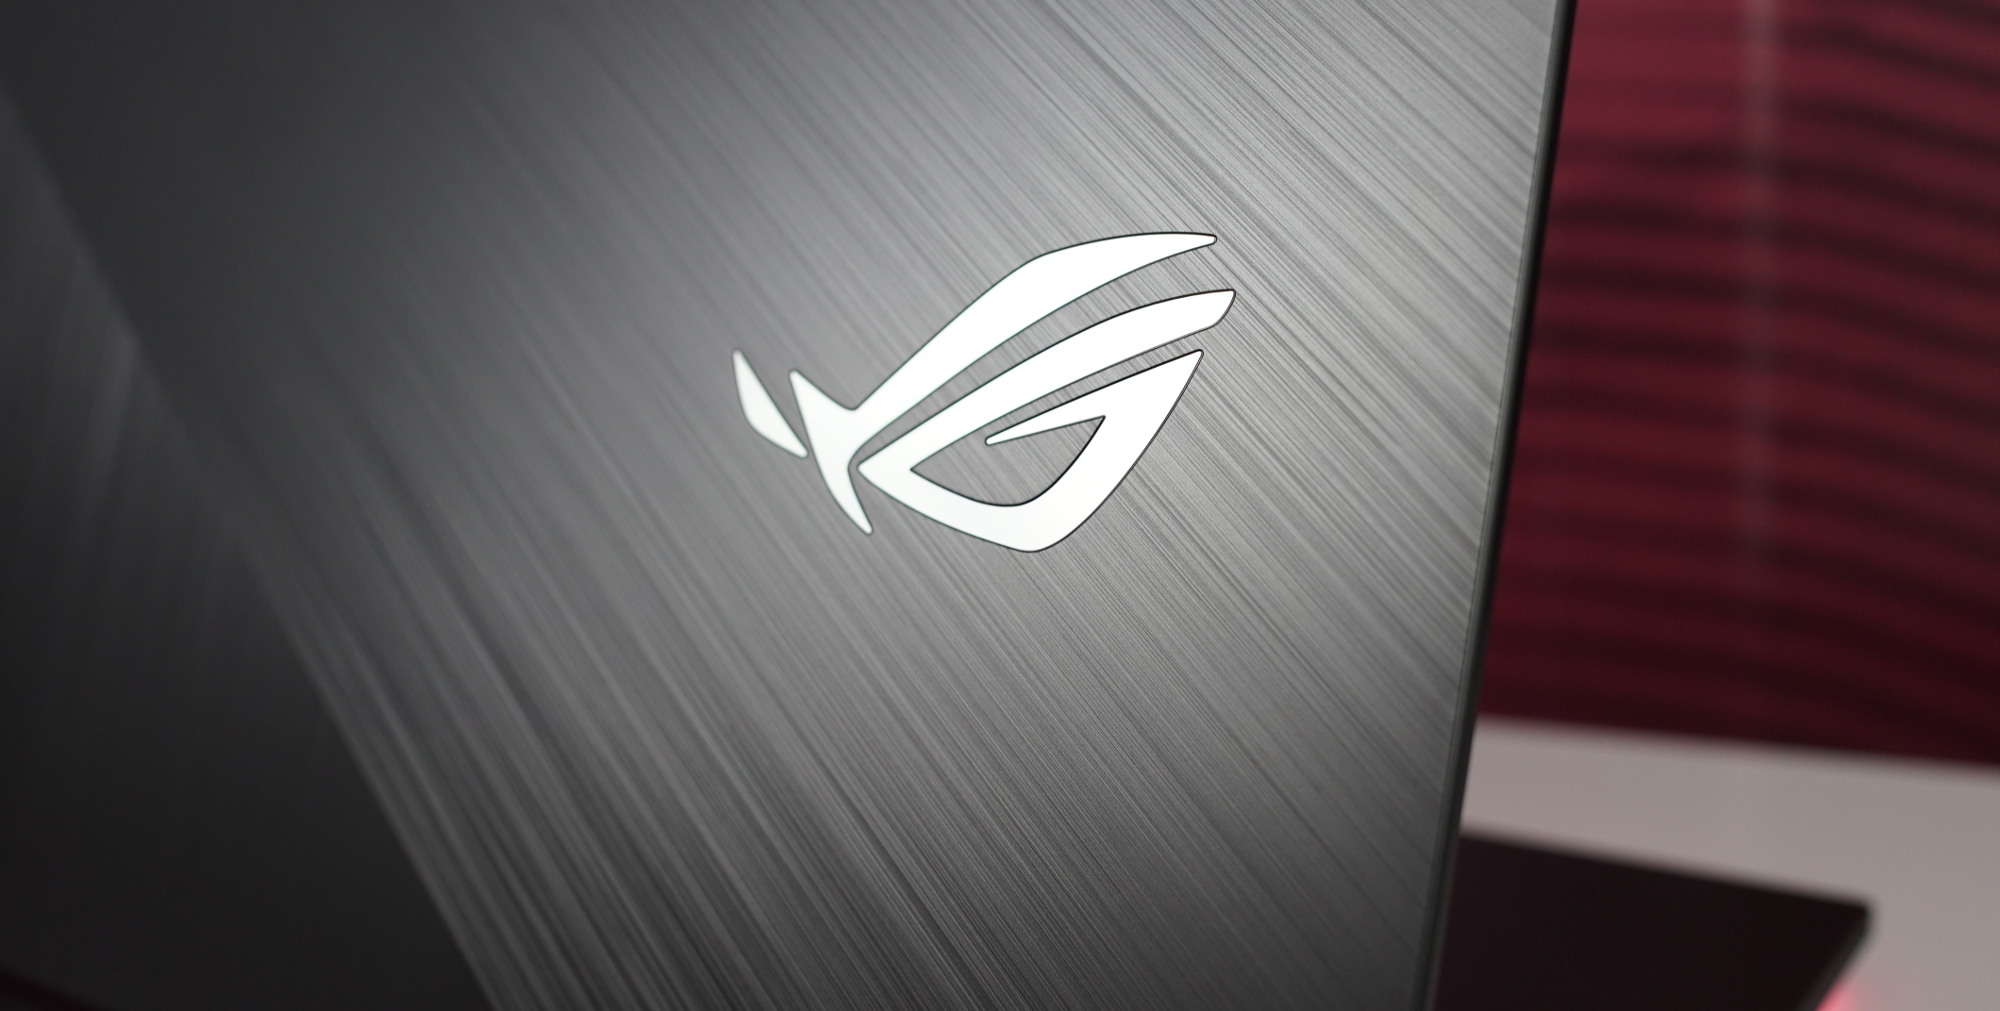 ASUS ROG Delta S review: A powerhouse that punches above its price tag